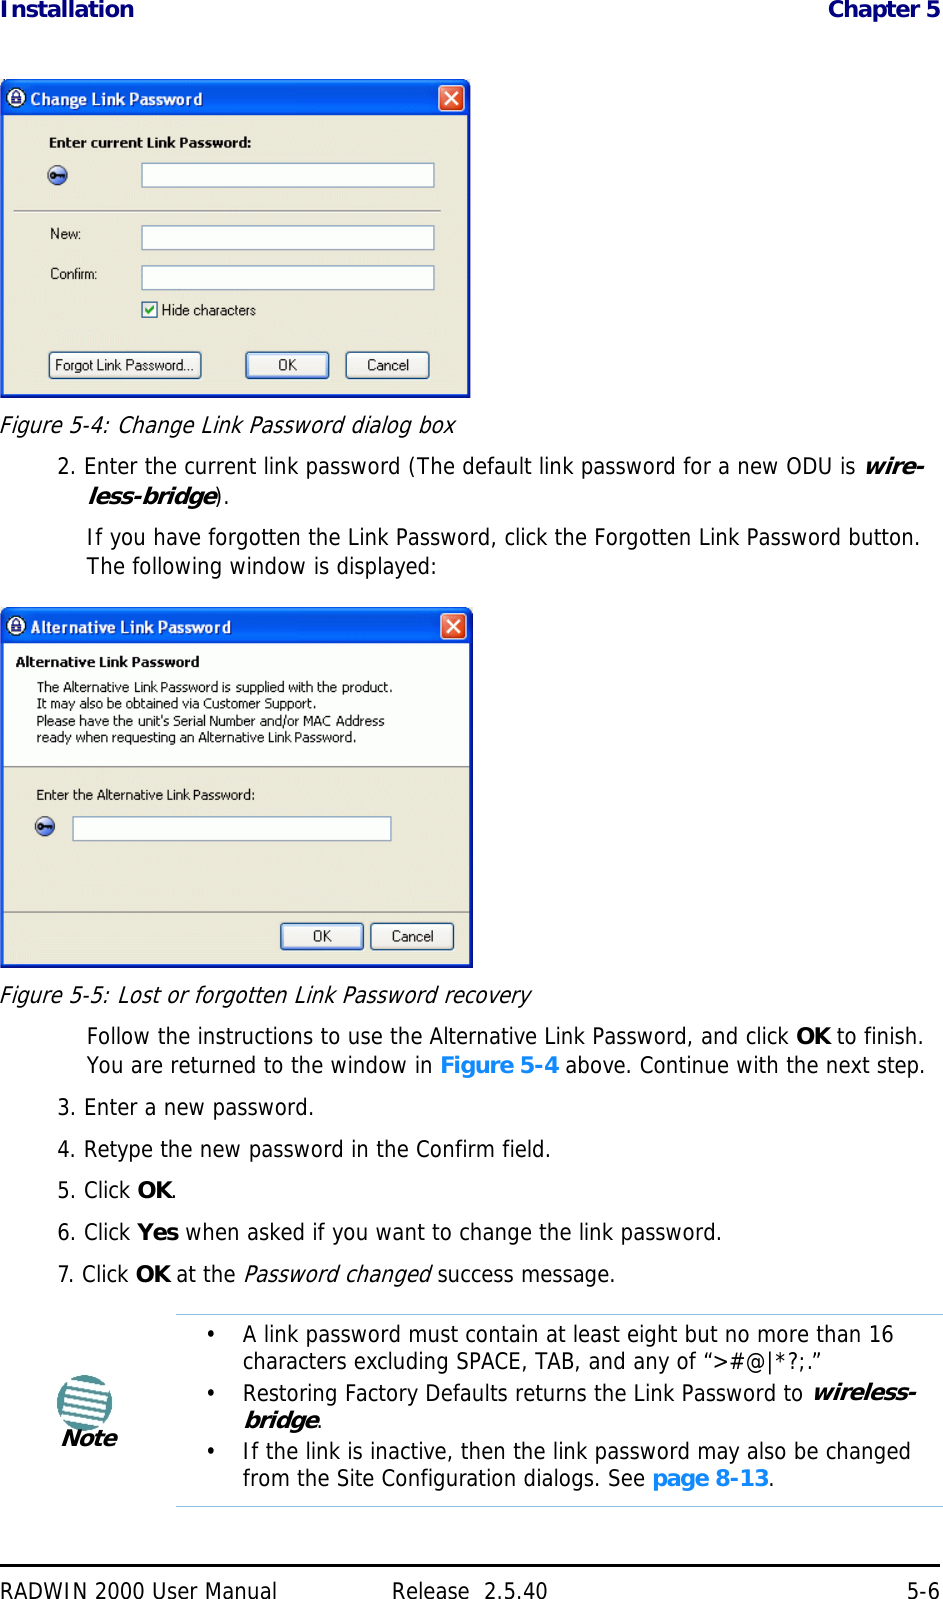 Installation Chapter 5RADWIN 2000 User Manual Release  2.5.40 5-6Figure 5-4: Change Link Password dialog box2. Enter the current link password (The default link password for a new ODU is wire-less-bridge).If you have forgotten the Link Password, click the Forgotten Link Password button. The following window is displayed:Figure 5-5: Lost or forgotten Link Password recoveryFollow the instructions to use the Alternative Link Password, and click OK to finish. You are returned to the window in Figure 5-4 above. Continue with the next step.3. Enter a new password.4. Retype the new password in the Confirm field.5. Click OK.6. Click Yes when asked if you want to change the link password.7. Click OK at the Password changed success message.Note• A link password must contain at least eight but no more than 16 characters excluding SPACE, TAB, and any of “&gt;#@|*?;.”• Restoring Factory Defaults returns the Link Password to wireless-bridge.• If the link is inactive, then the link password may also be changed from the Site Configuration dialogs. See page 8-13.